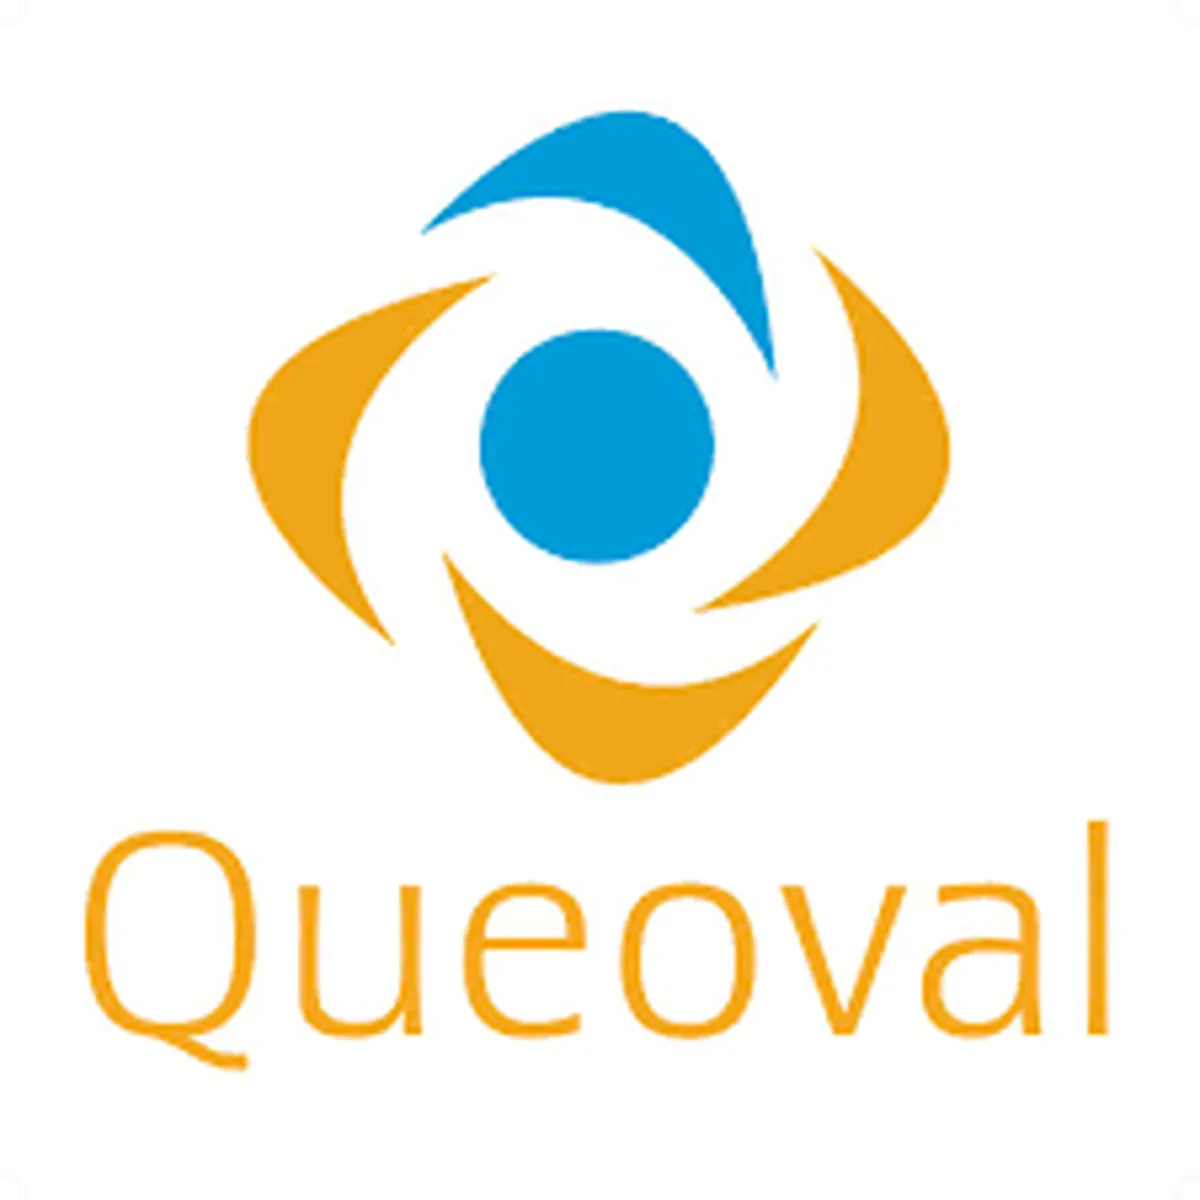 Queoval Review